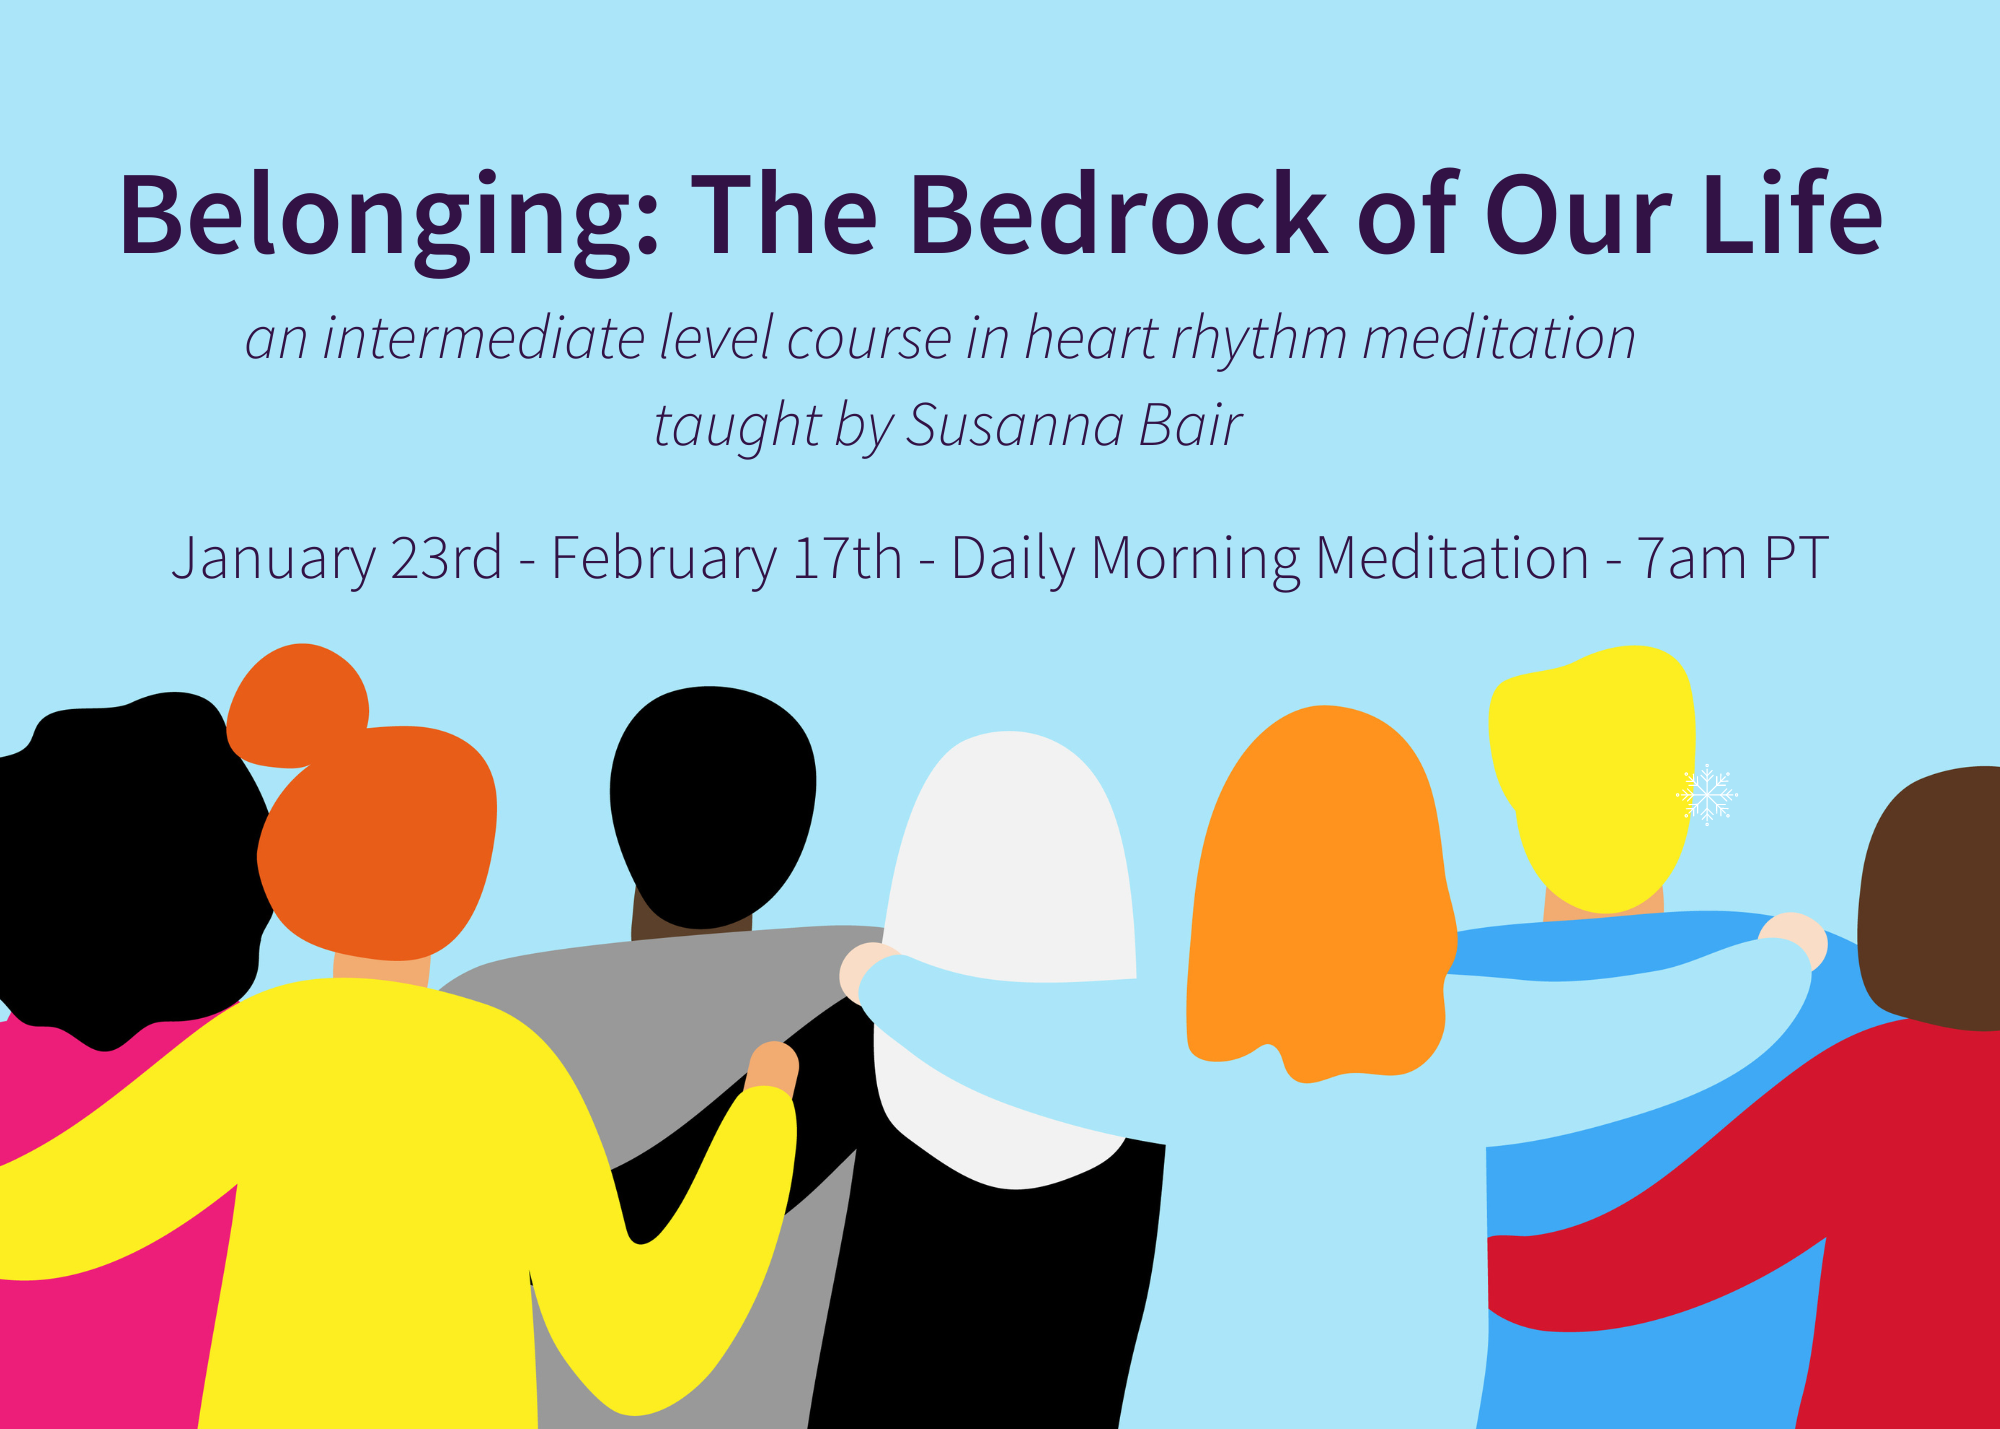 Belonging: The Bedrock of Our Life